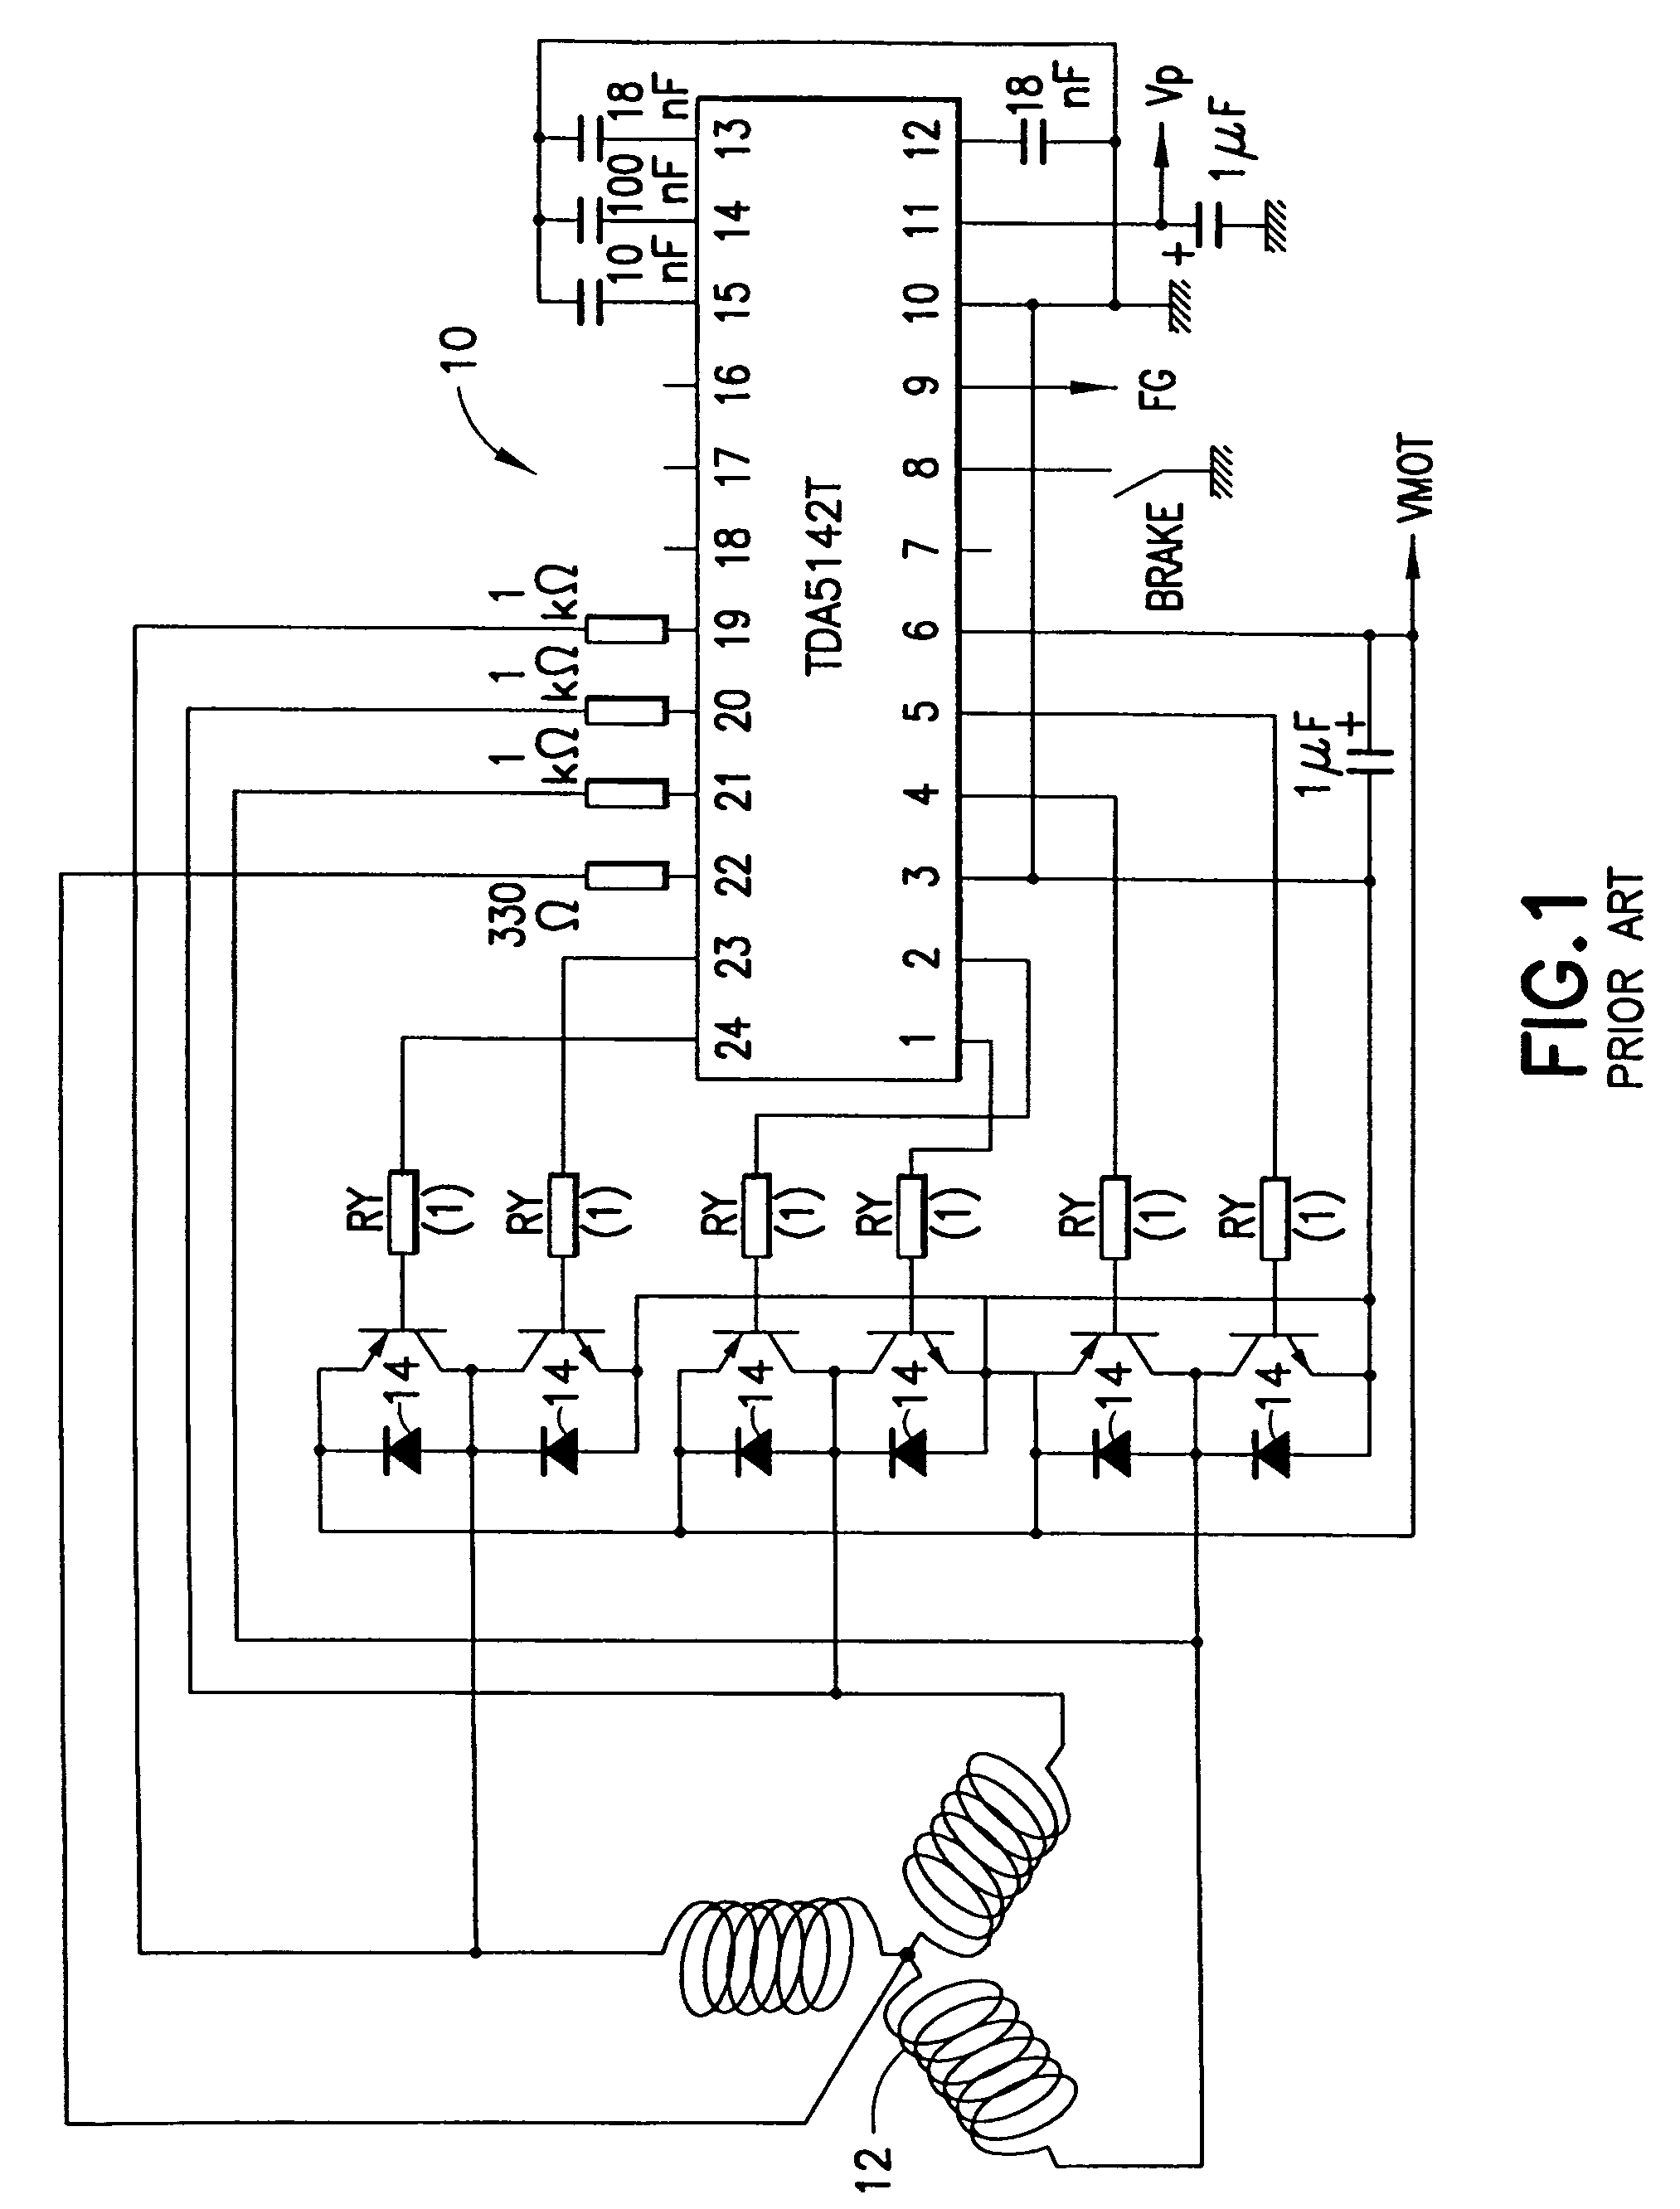 Sensorless brushless direct current motor drive using pulse width modulation speed control at motor frequency